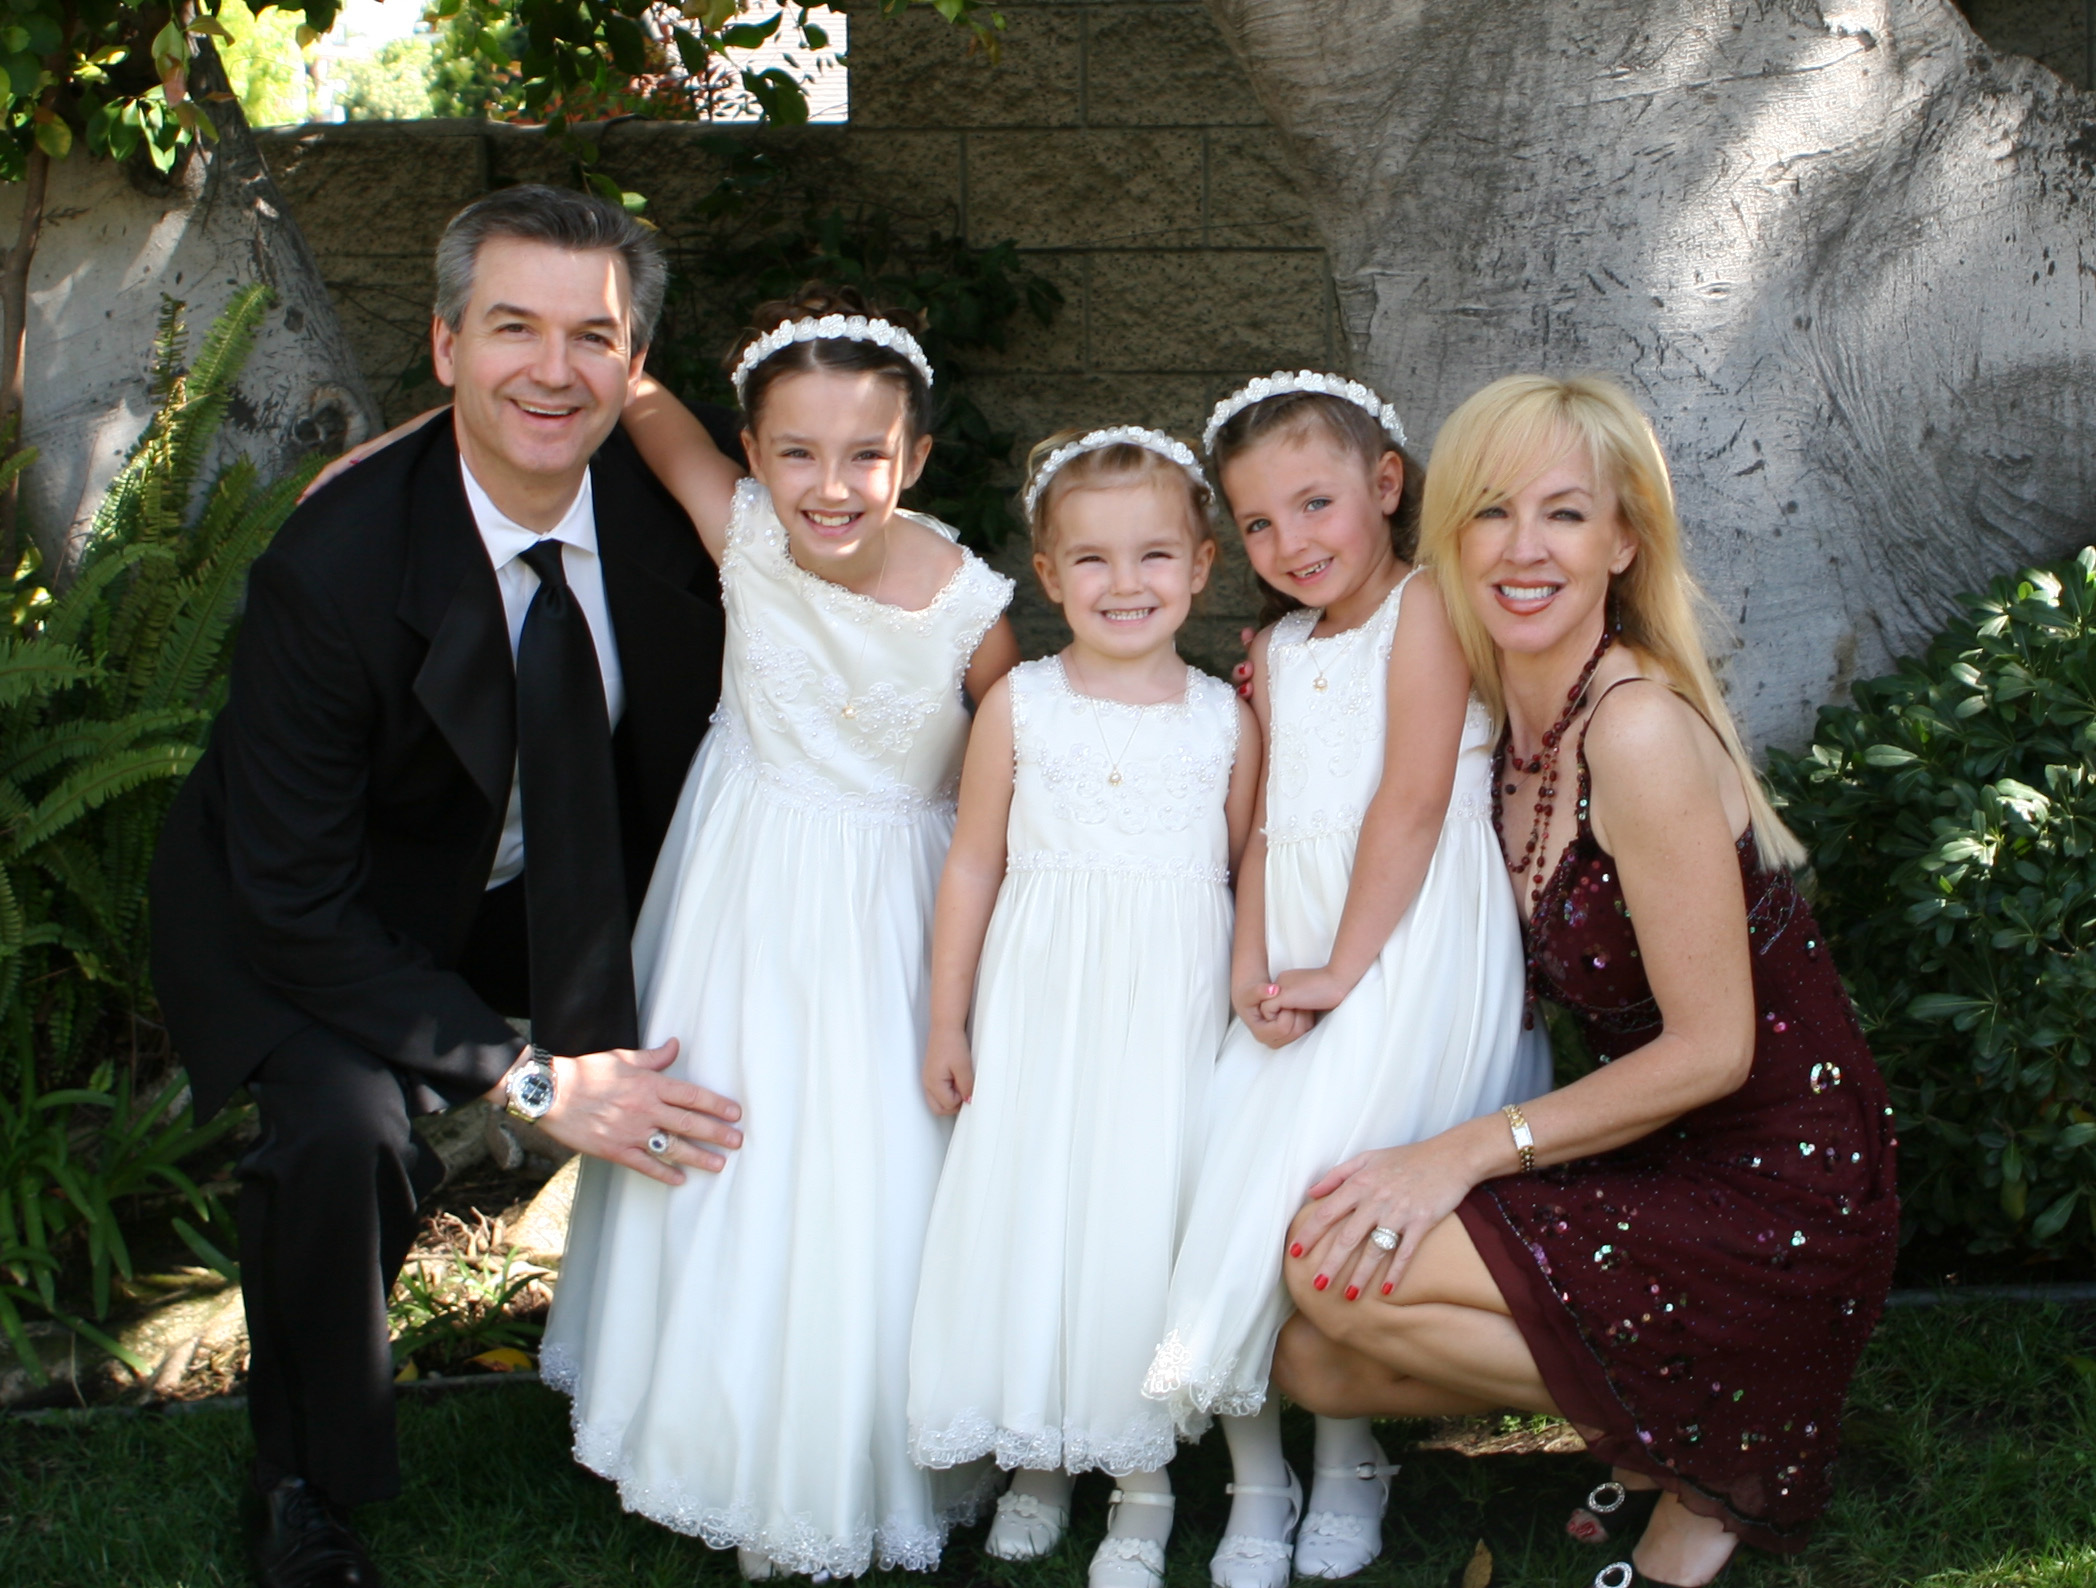 Dr. Sexton Dermatologist in Irvine, California with his wife Robin and his daughters Colette, Camille and Chloe